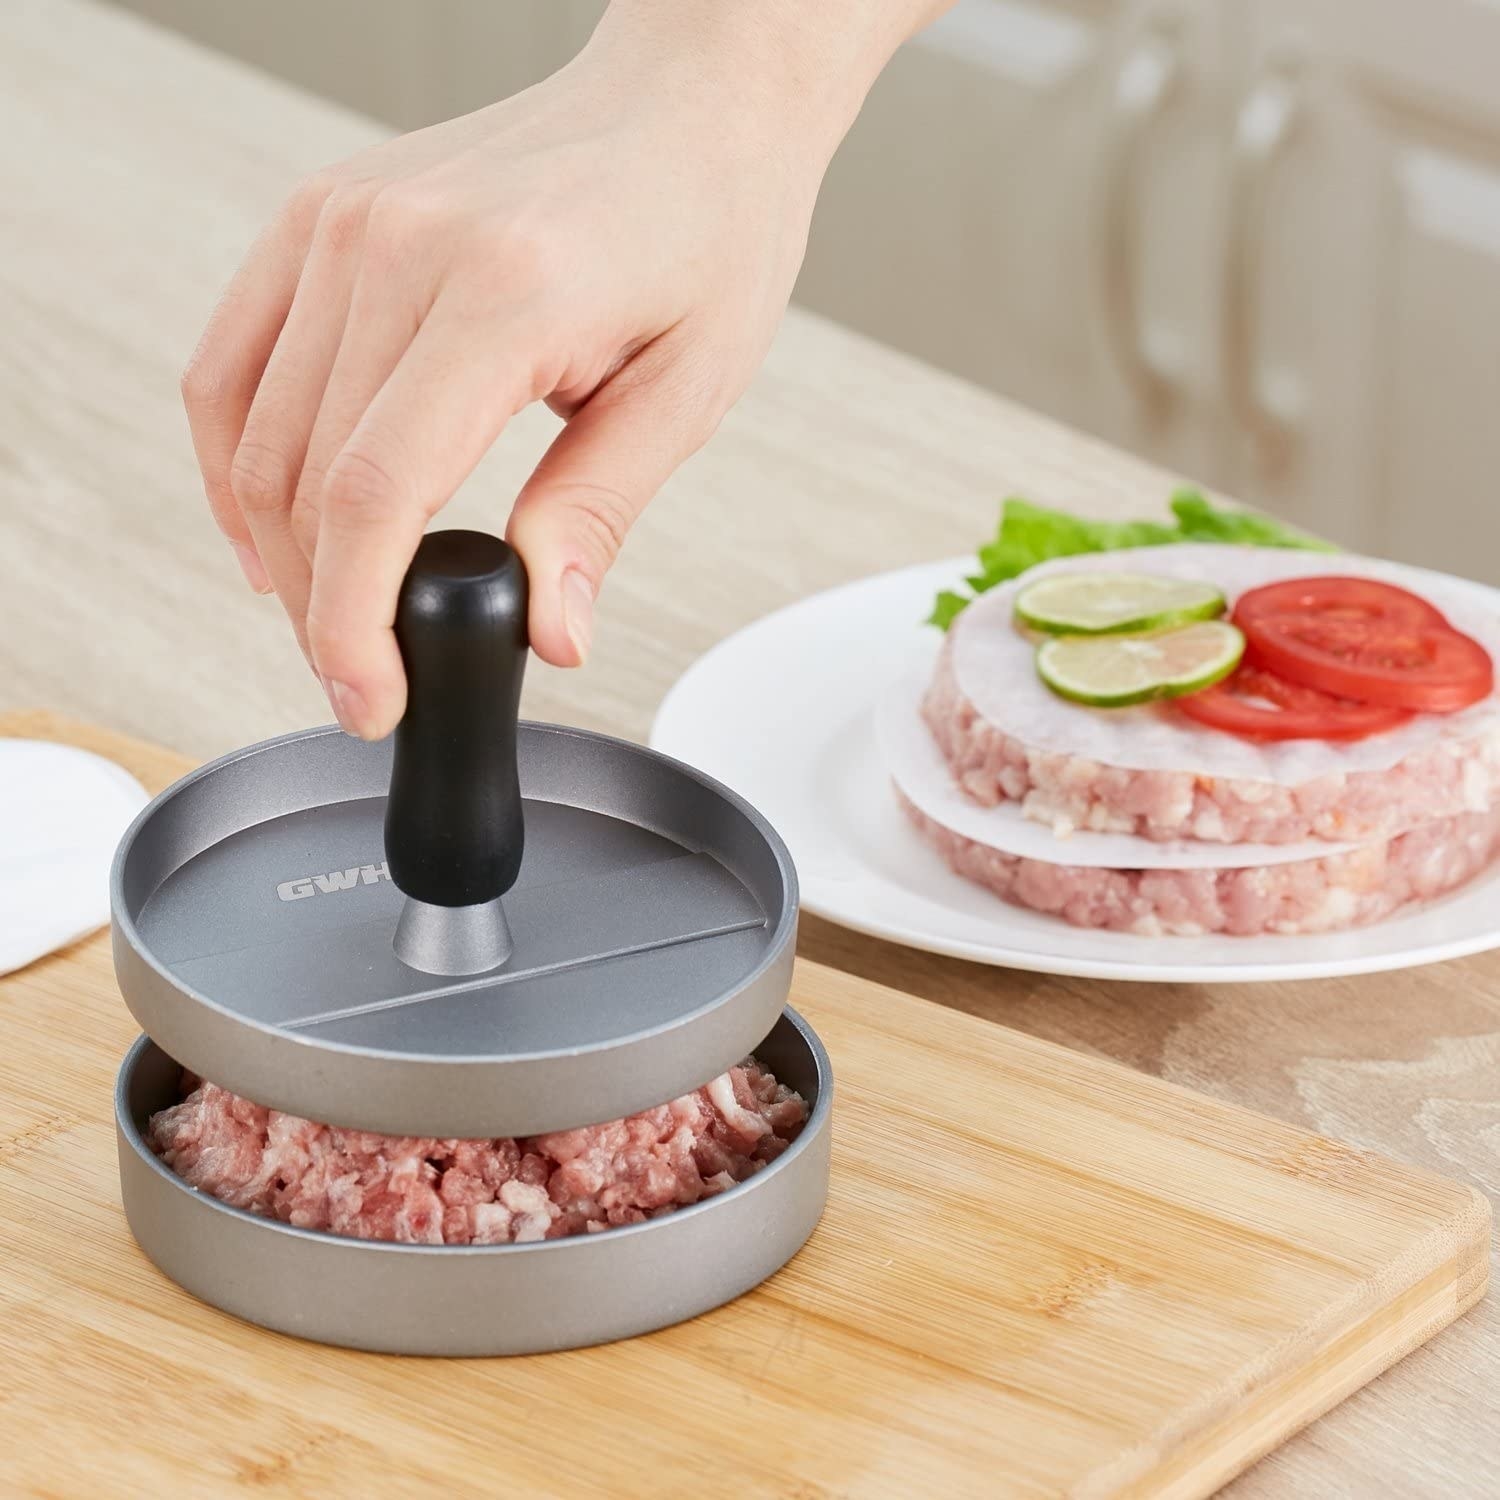 A person using the top tamper to press down the ground meat